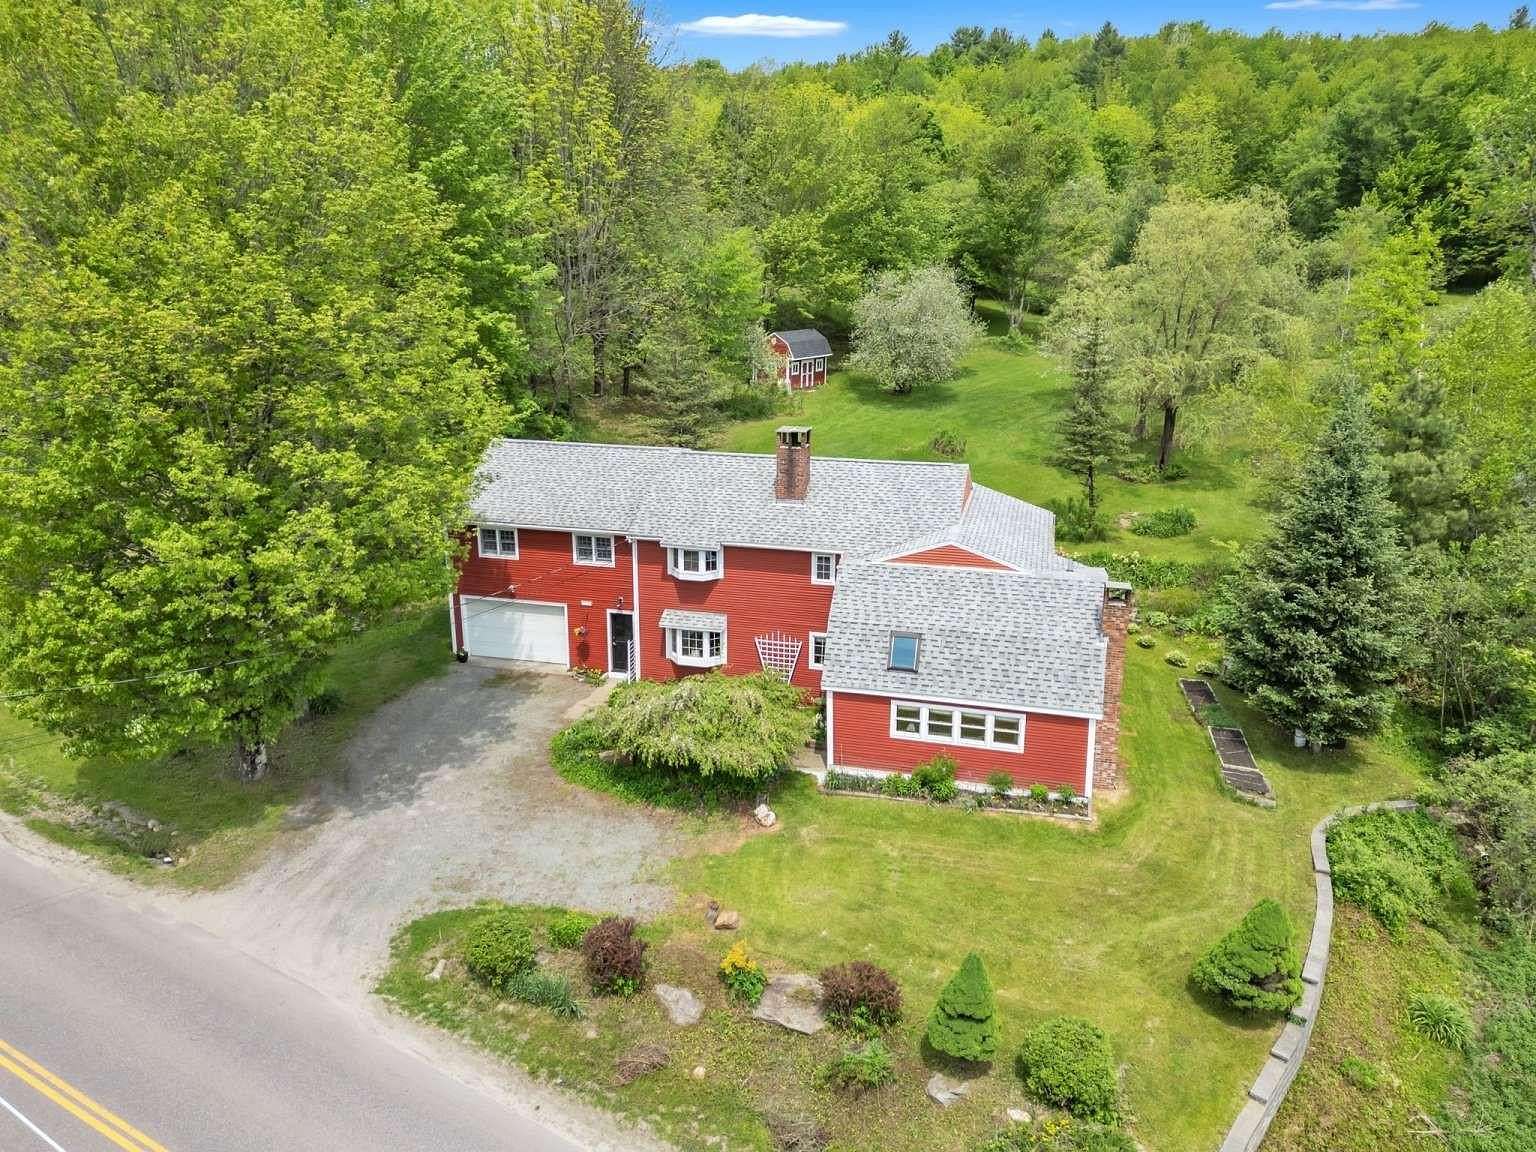 21.4 Acres of Land with Home for Sale in Stowe, Vermont